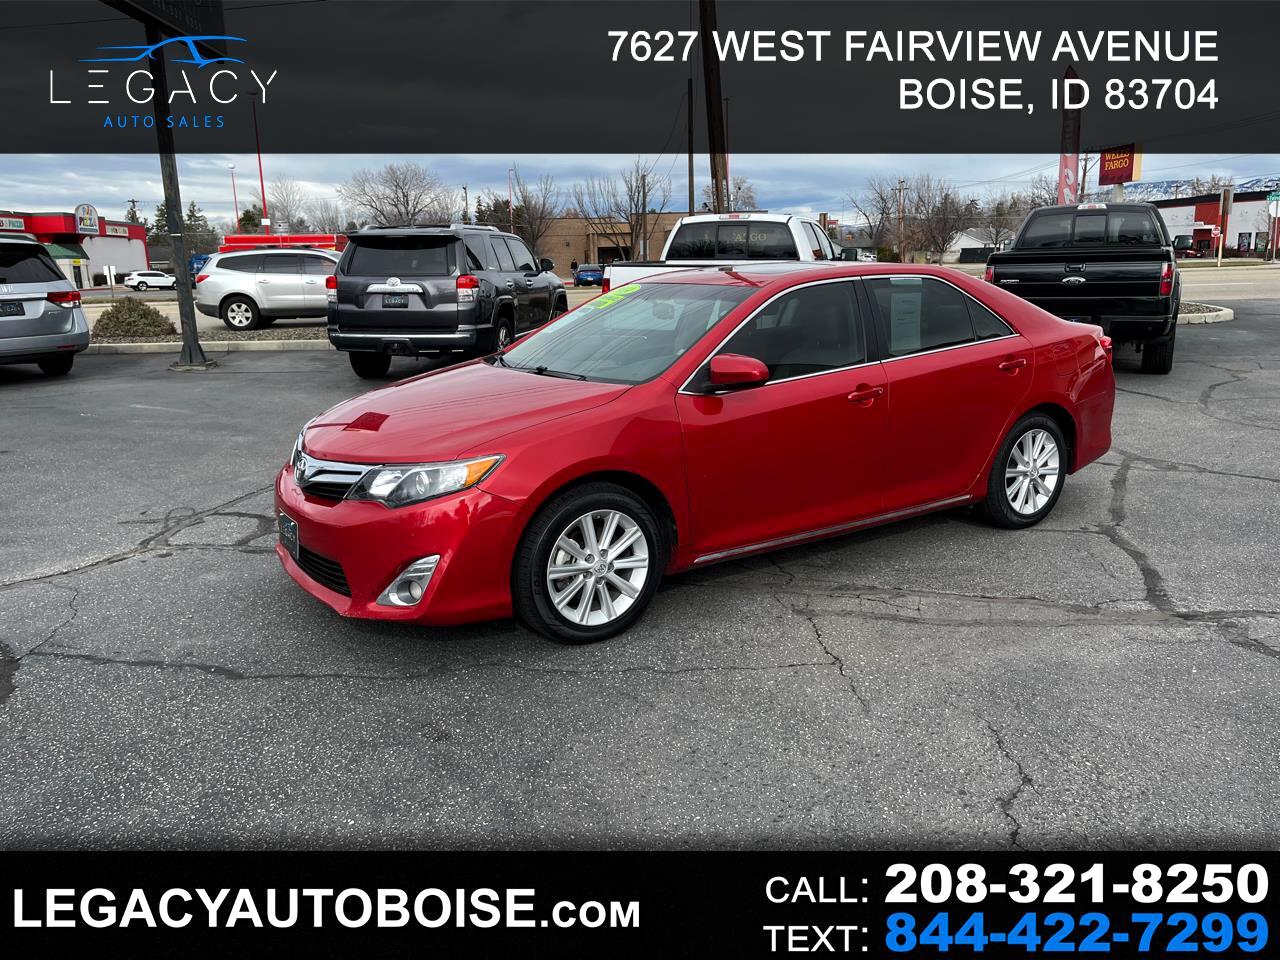 2014 Toyota Camry 4dr Sdn I4 Auto XLE (Natl)